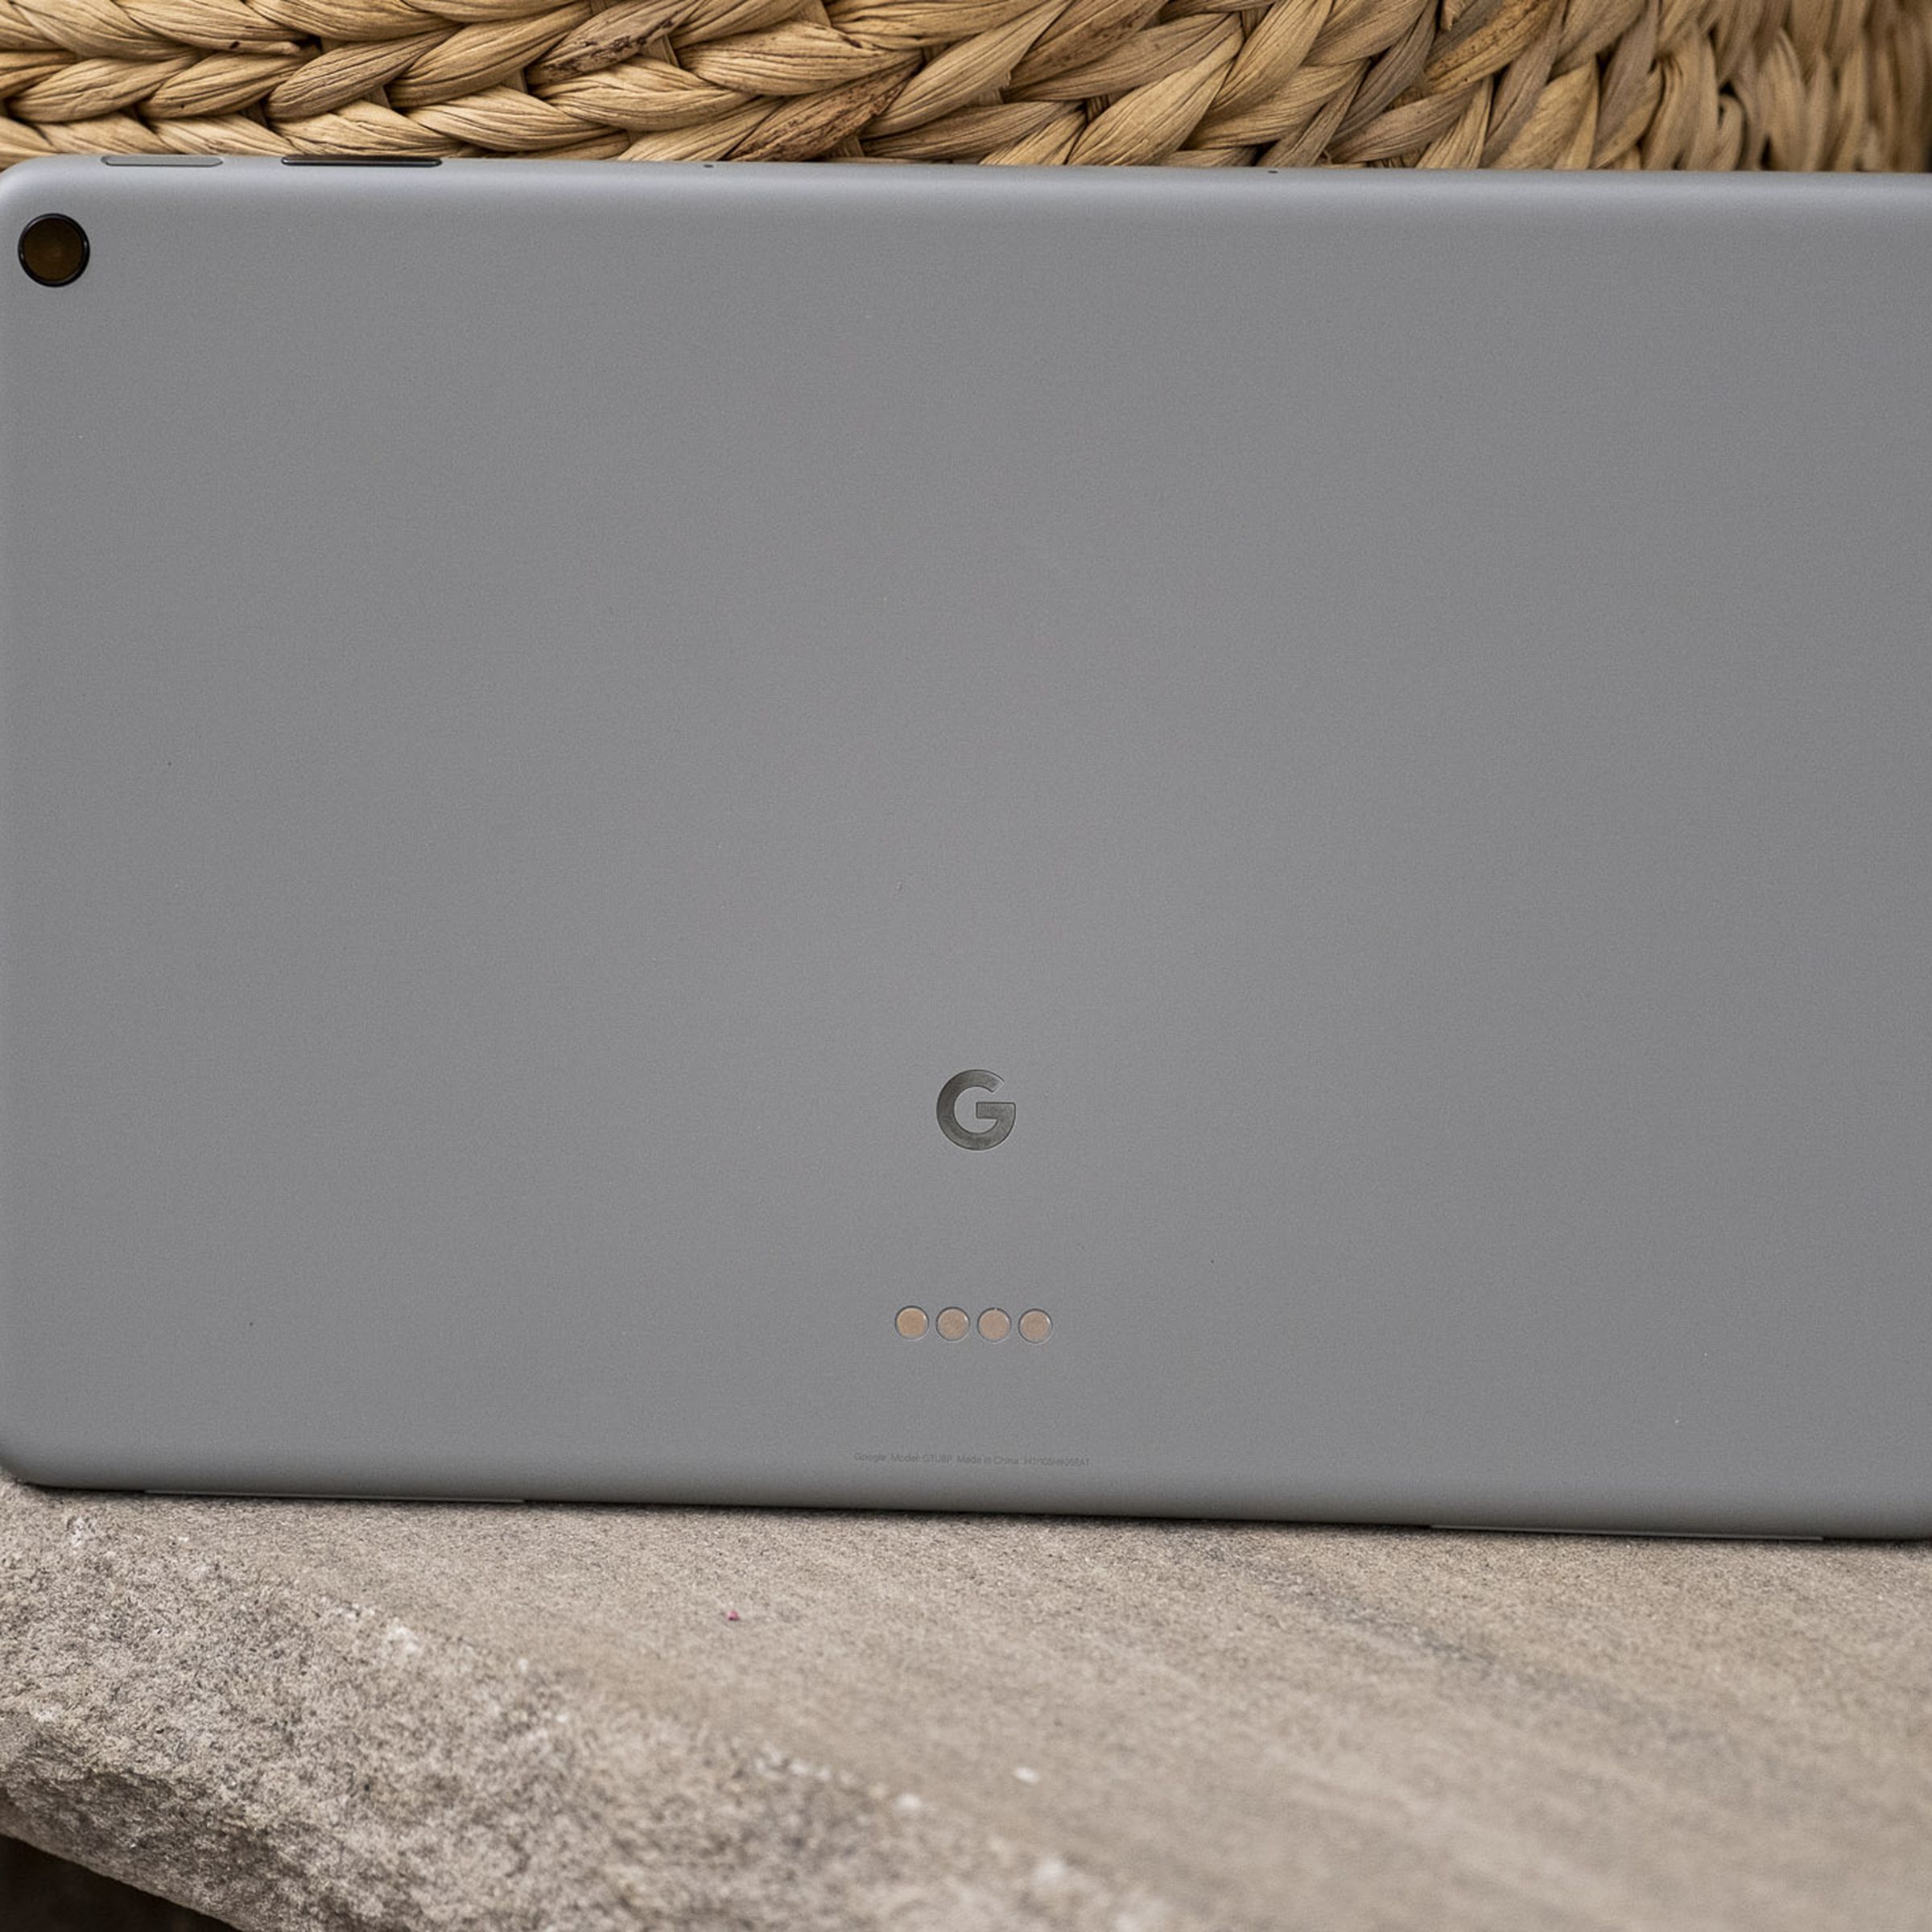 The back of the Pixel Tablet